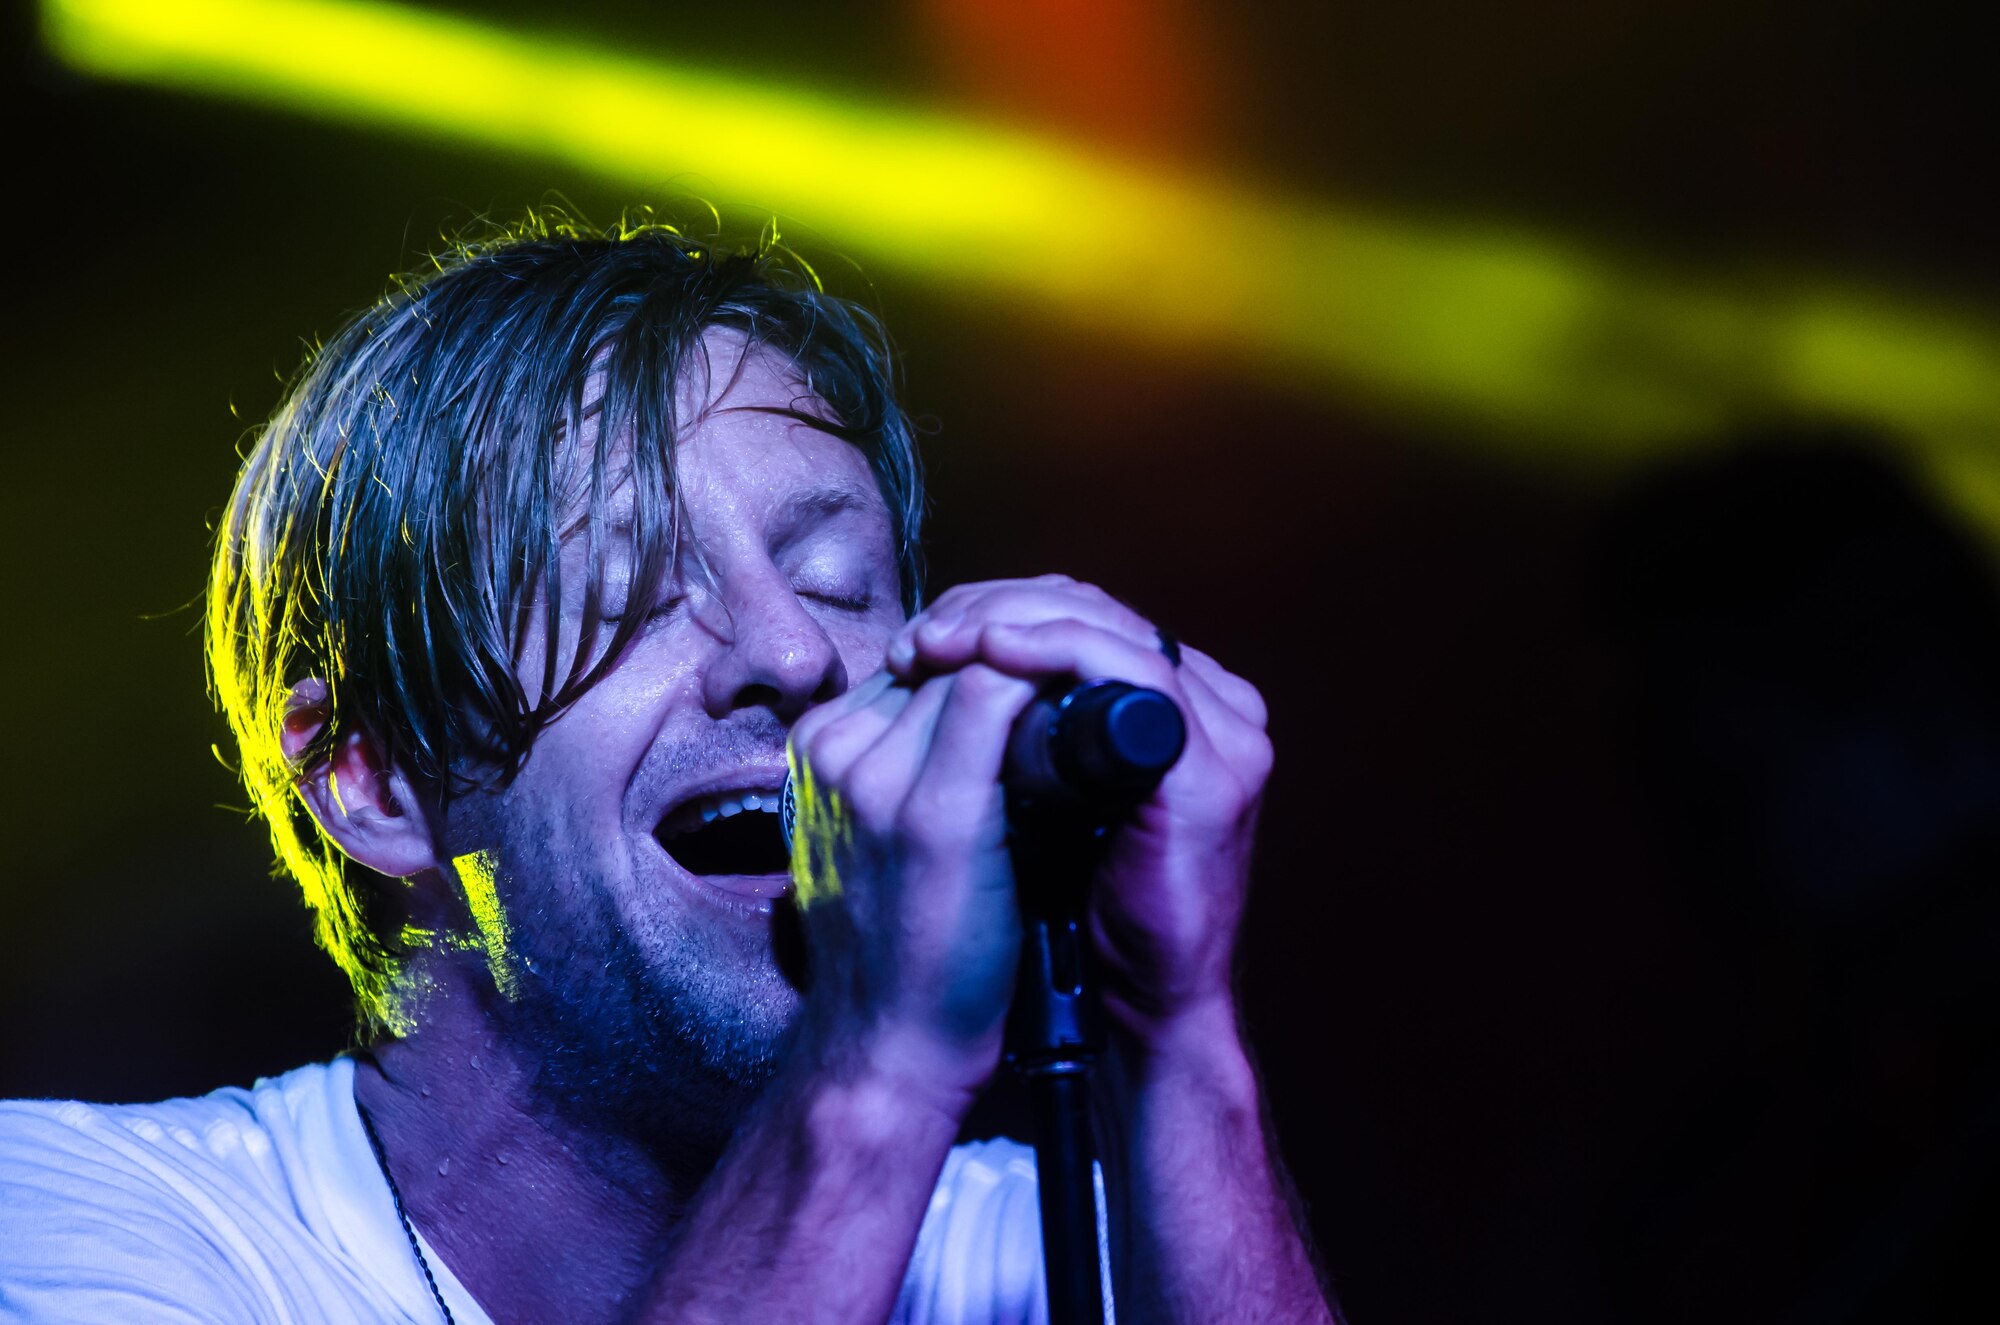 Switchfoot frontman Jon Foreman sings his band's hit song Dare You To Move Nov. 21, 2015, at Andersen Air Force Base, Guam. The Grammy Award-winning band visited the island to perform tribute concerts for service members and families. (U.S. Air Force photo by Staff Sgt. Alexander W. Riedel/Released)